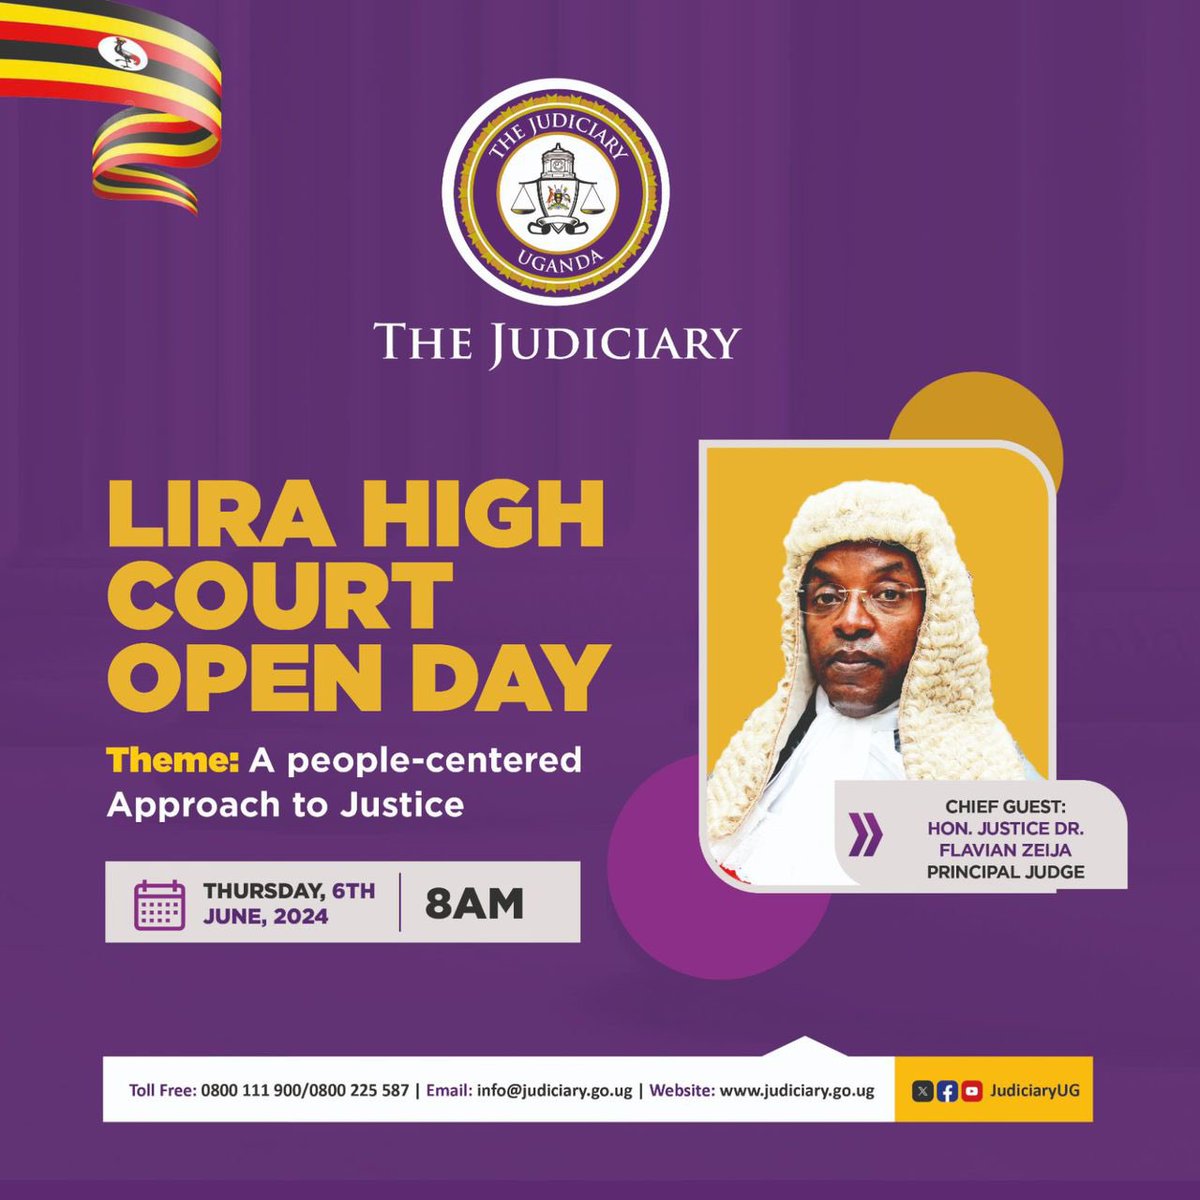 The Principal Judge Dr Flavian Zeija will on the 6th June 2024 preside over Lira High Court Open Day